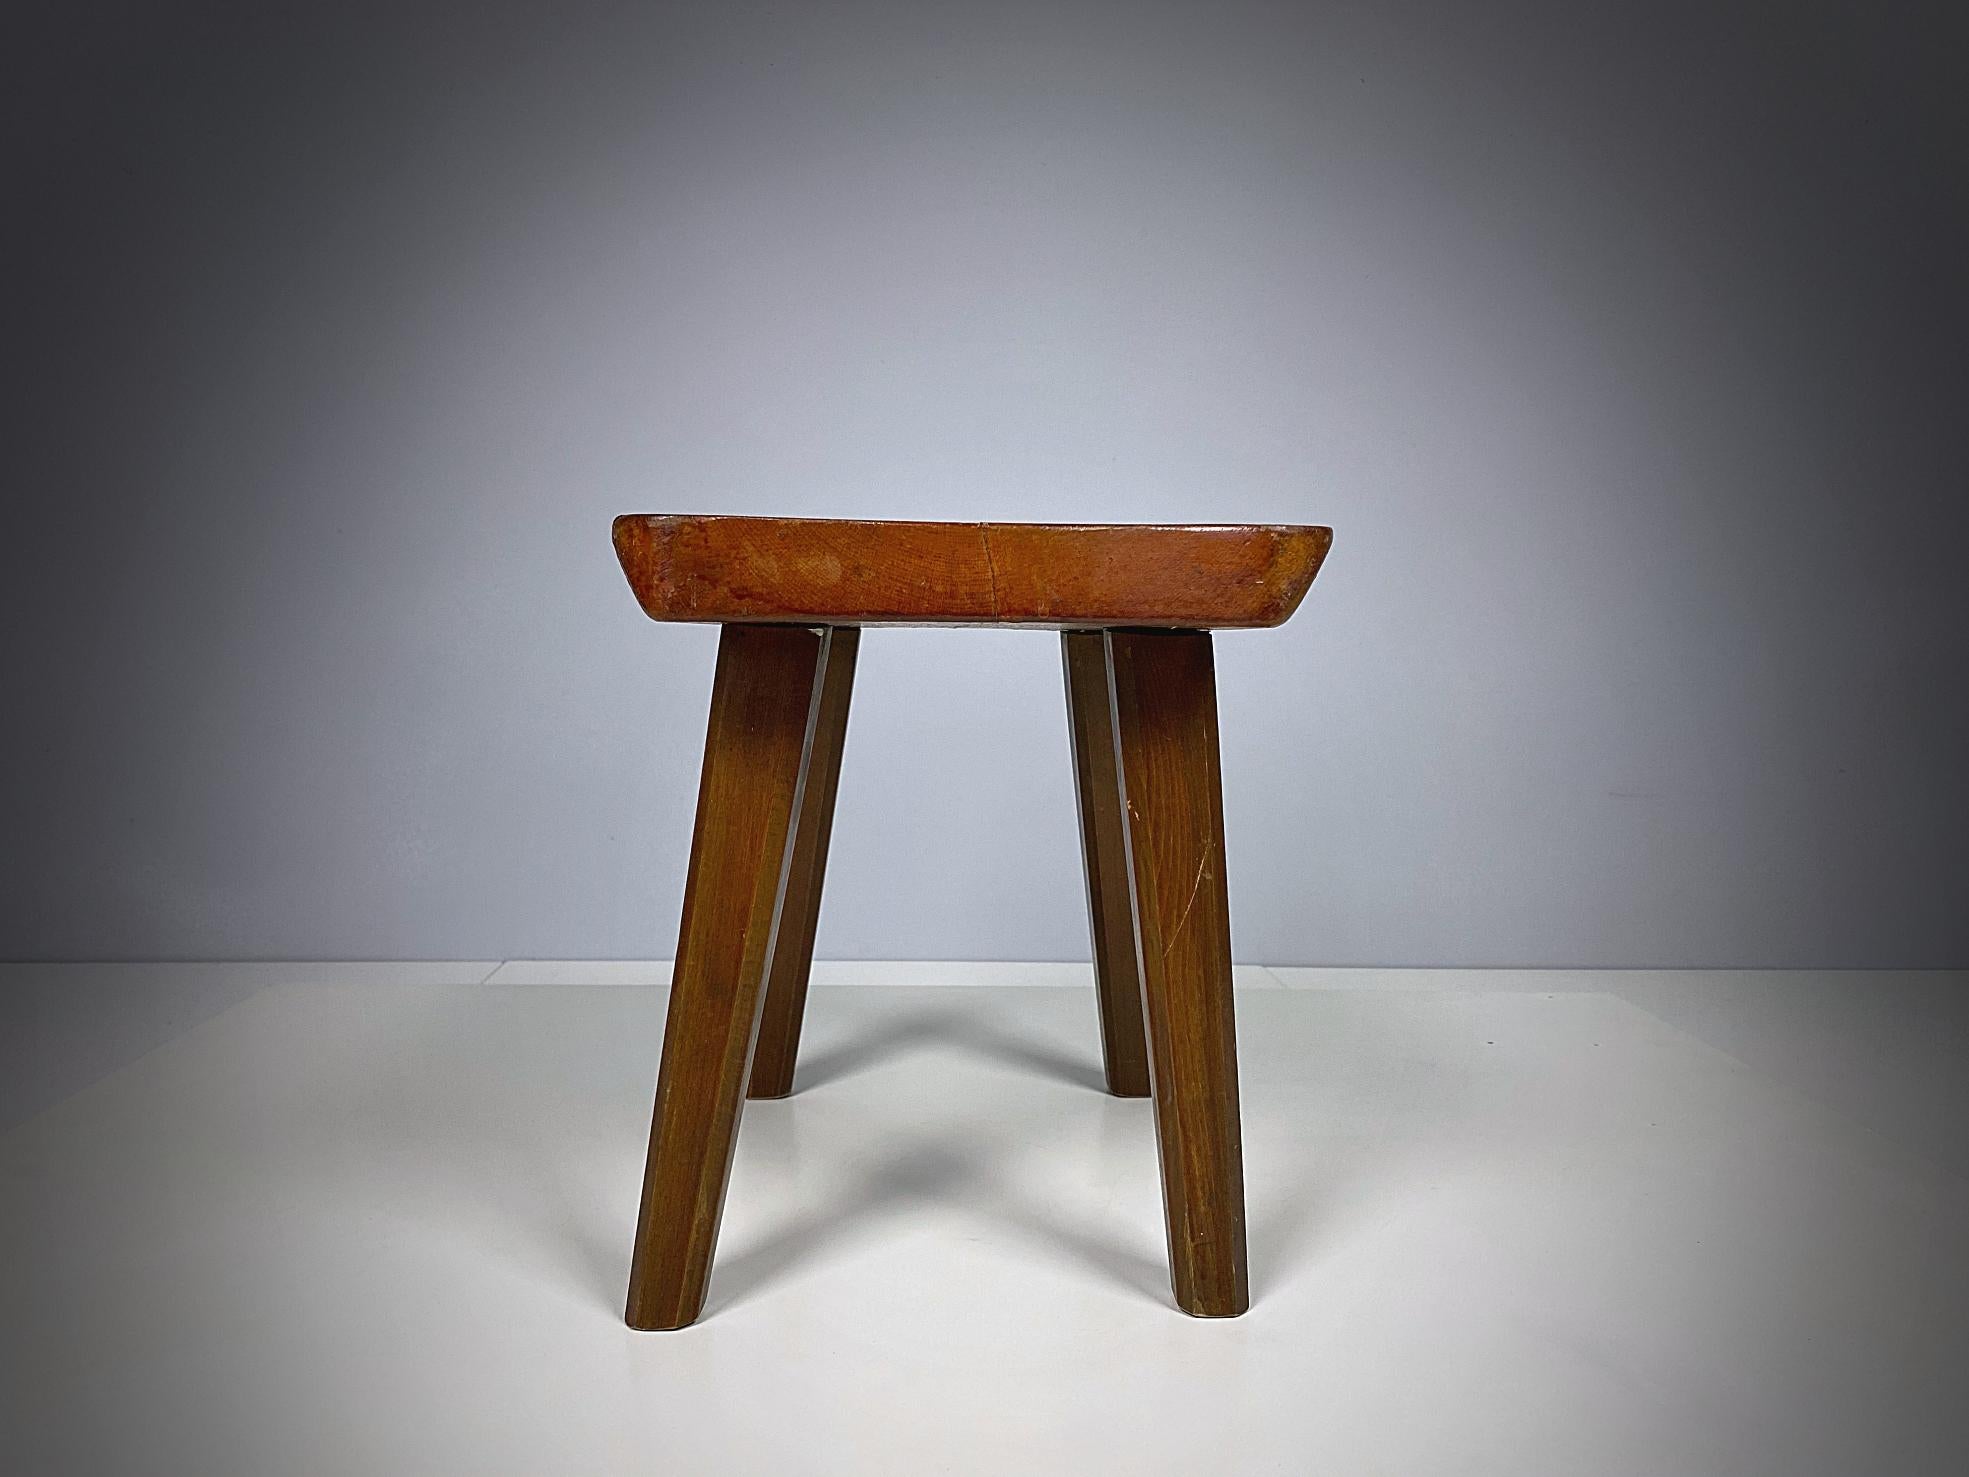 Hand-Crafted Midcentury French Artisanal Oak Stool, 1950s, France For Sale